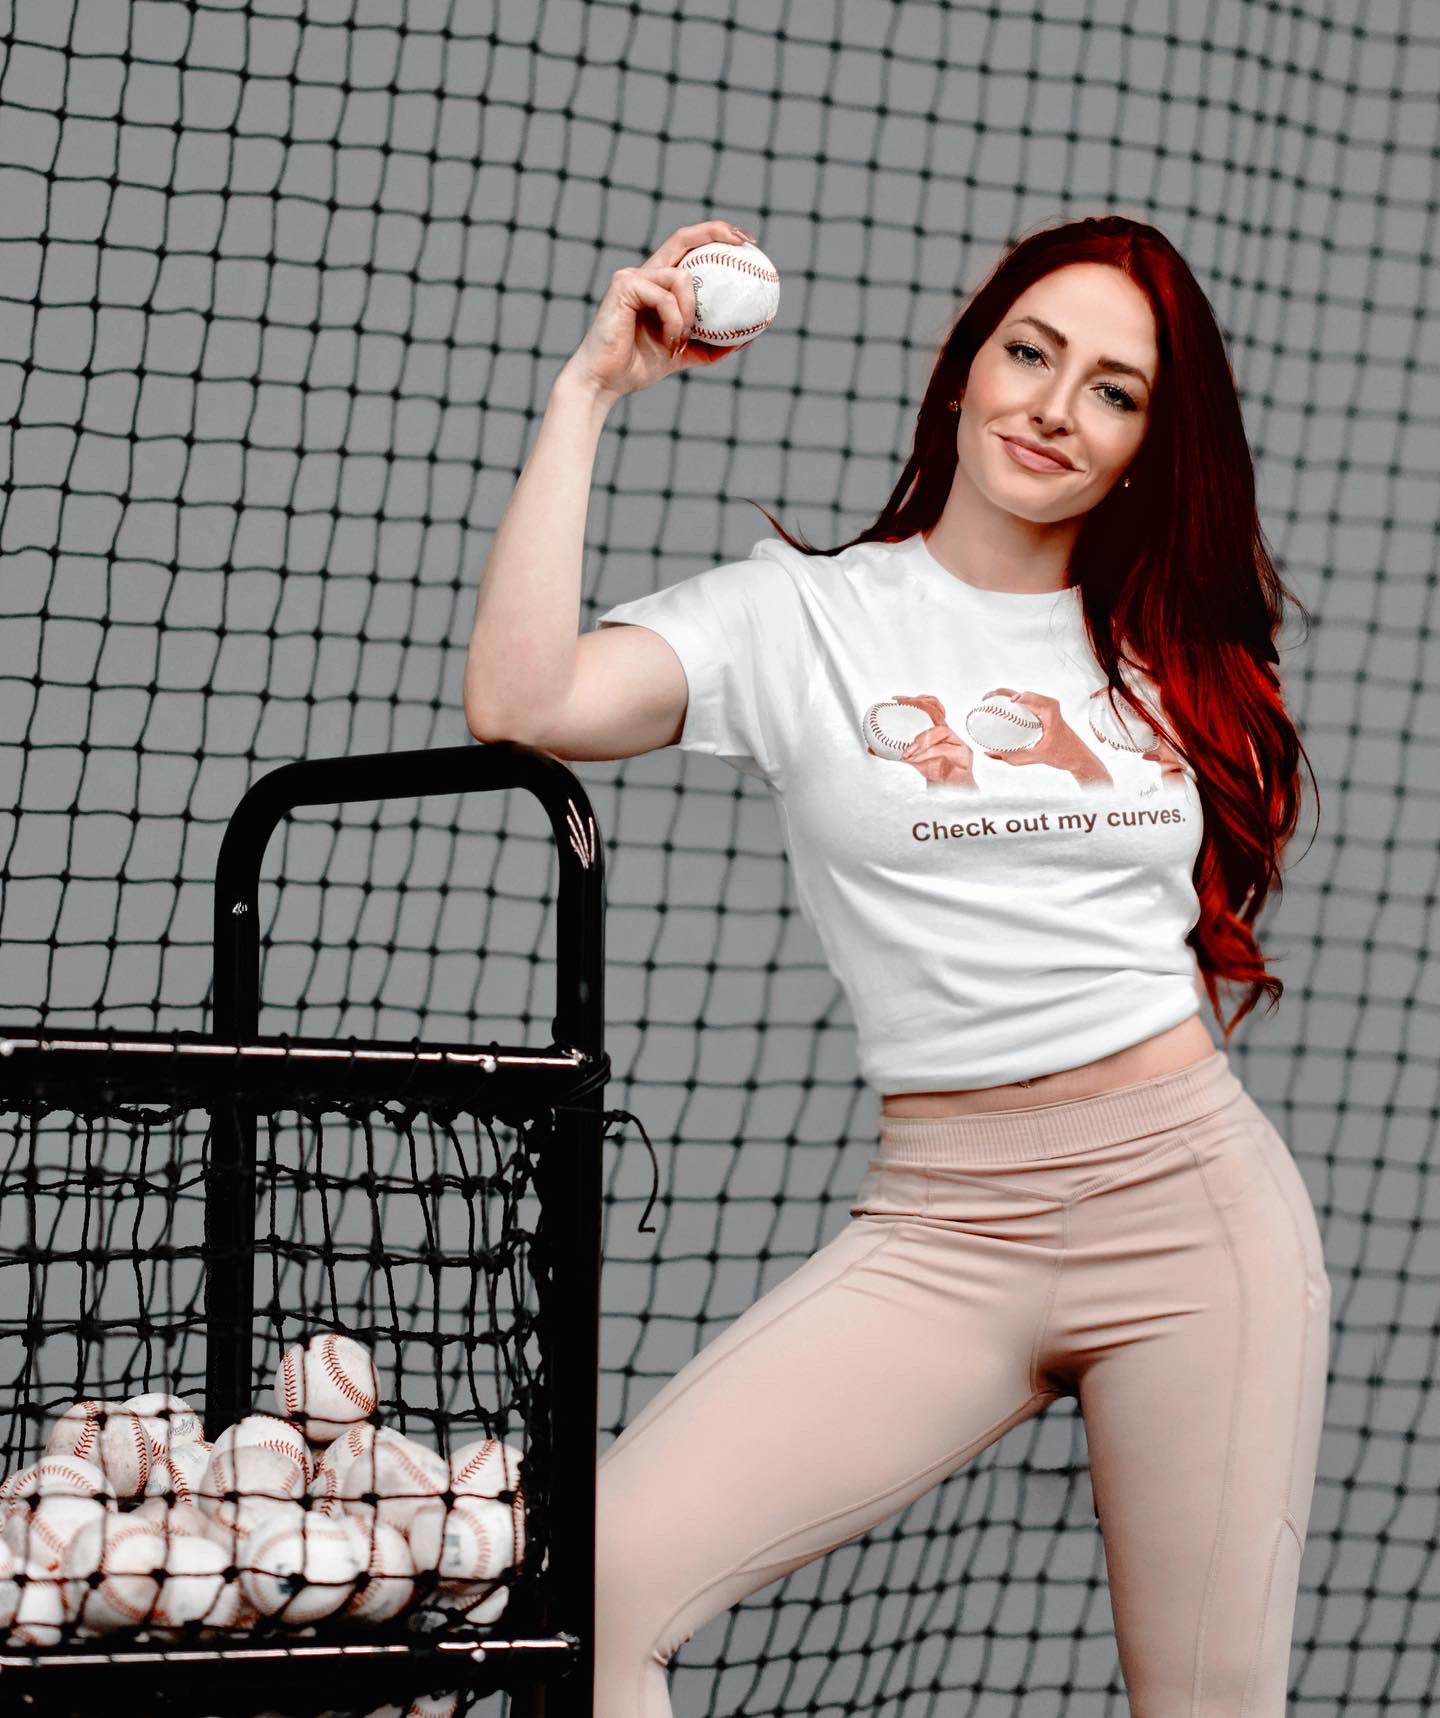 Rachel Luba (レイチェル・ルーバ) on X: CHECK OUT MY CURVES see what I did  there?? 💅🏻⚾️ Shop this hand-drawn shirt by yours truly on  @Watch_Momentum's website!  / X